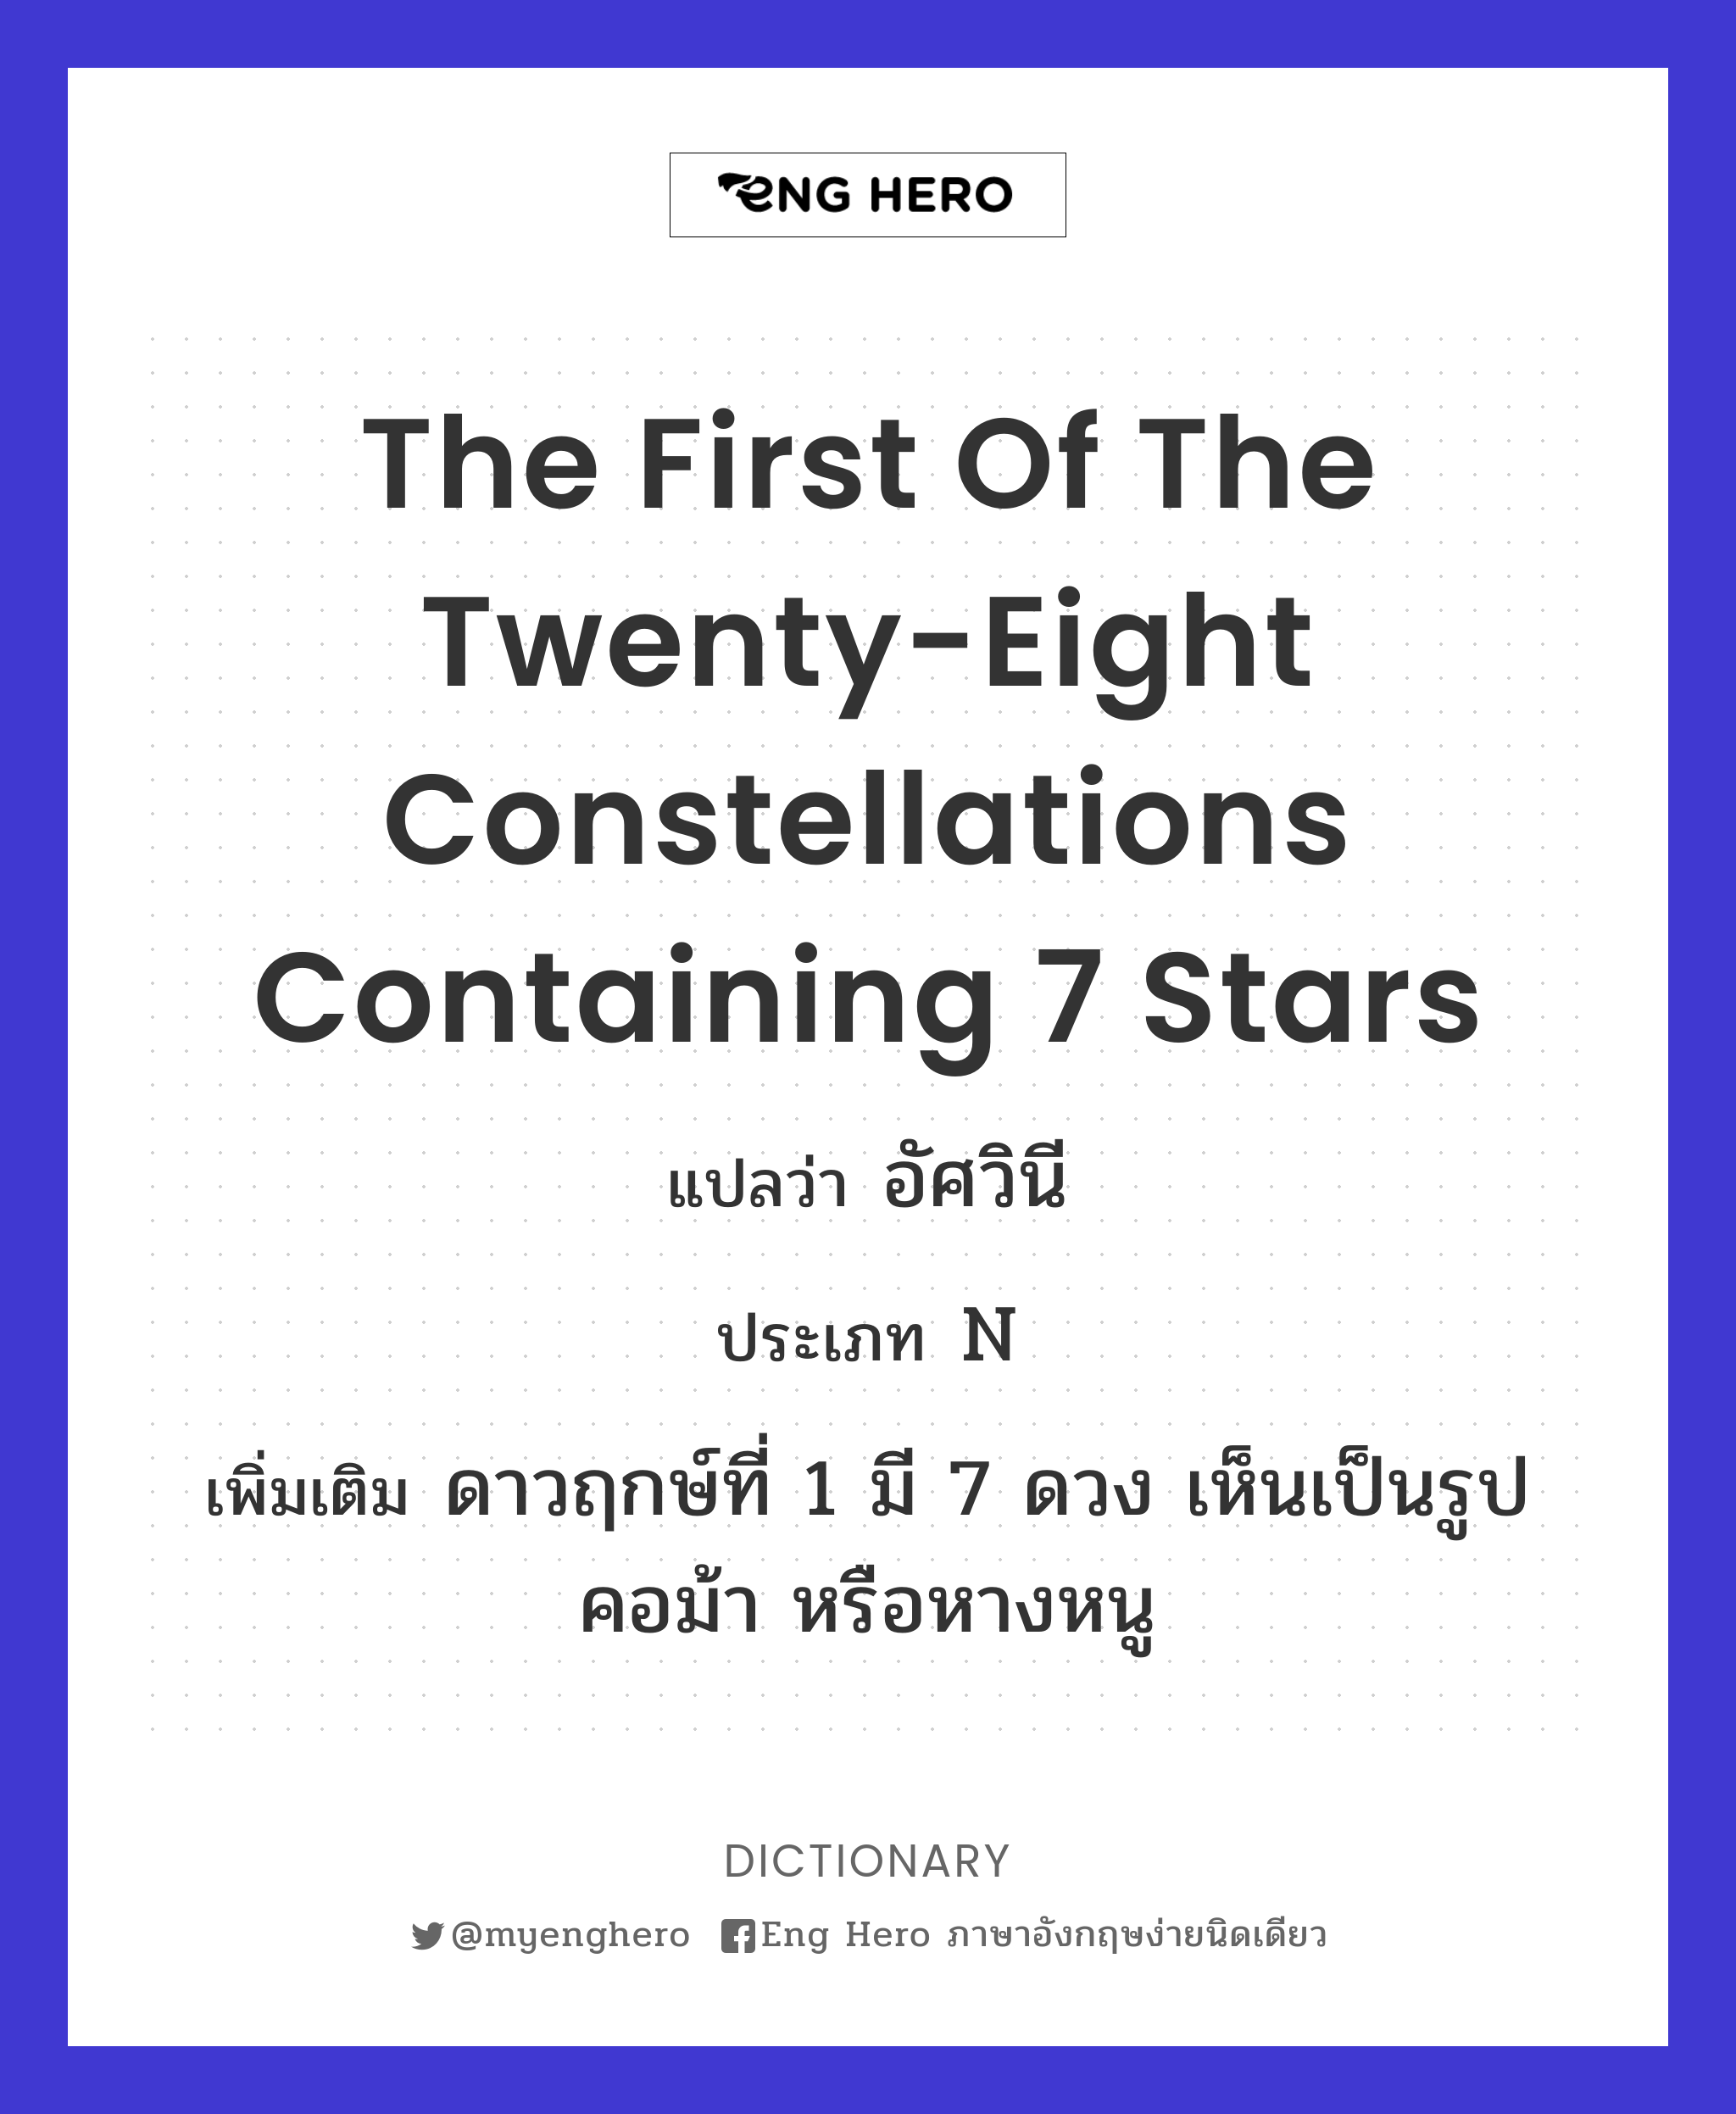 the first of the twenty-eight constellations containing 7 stars